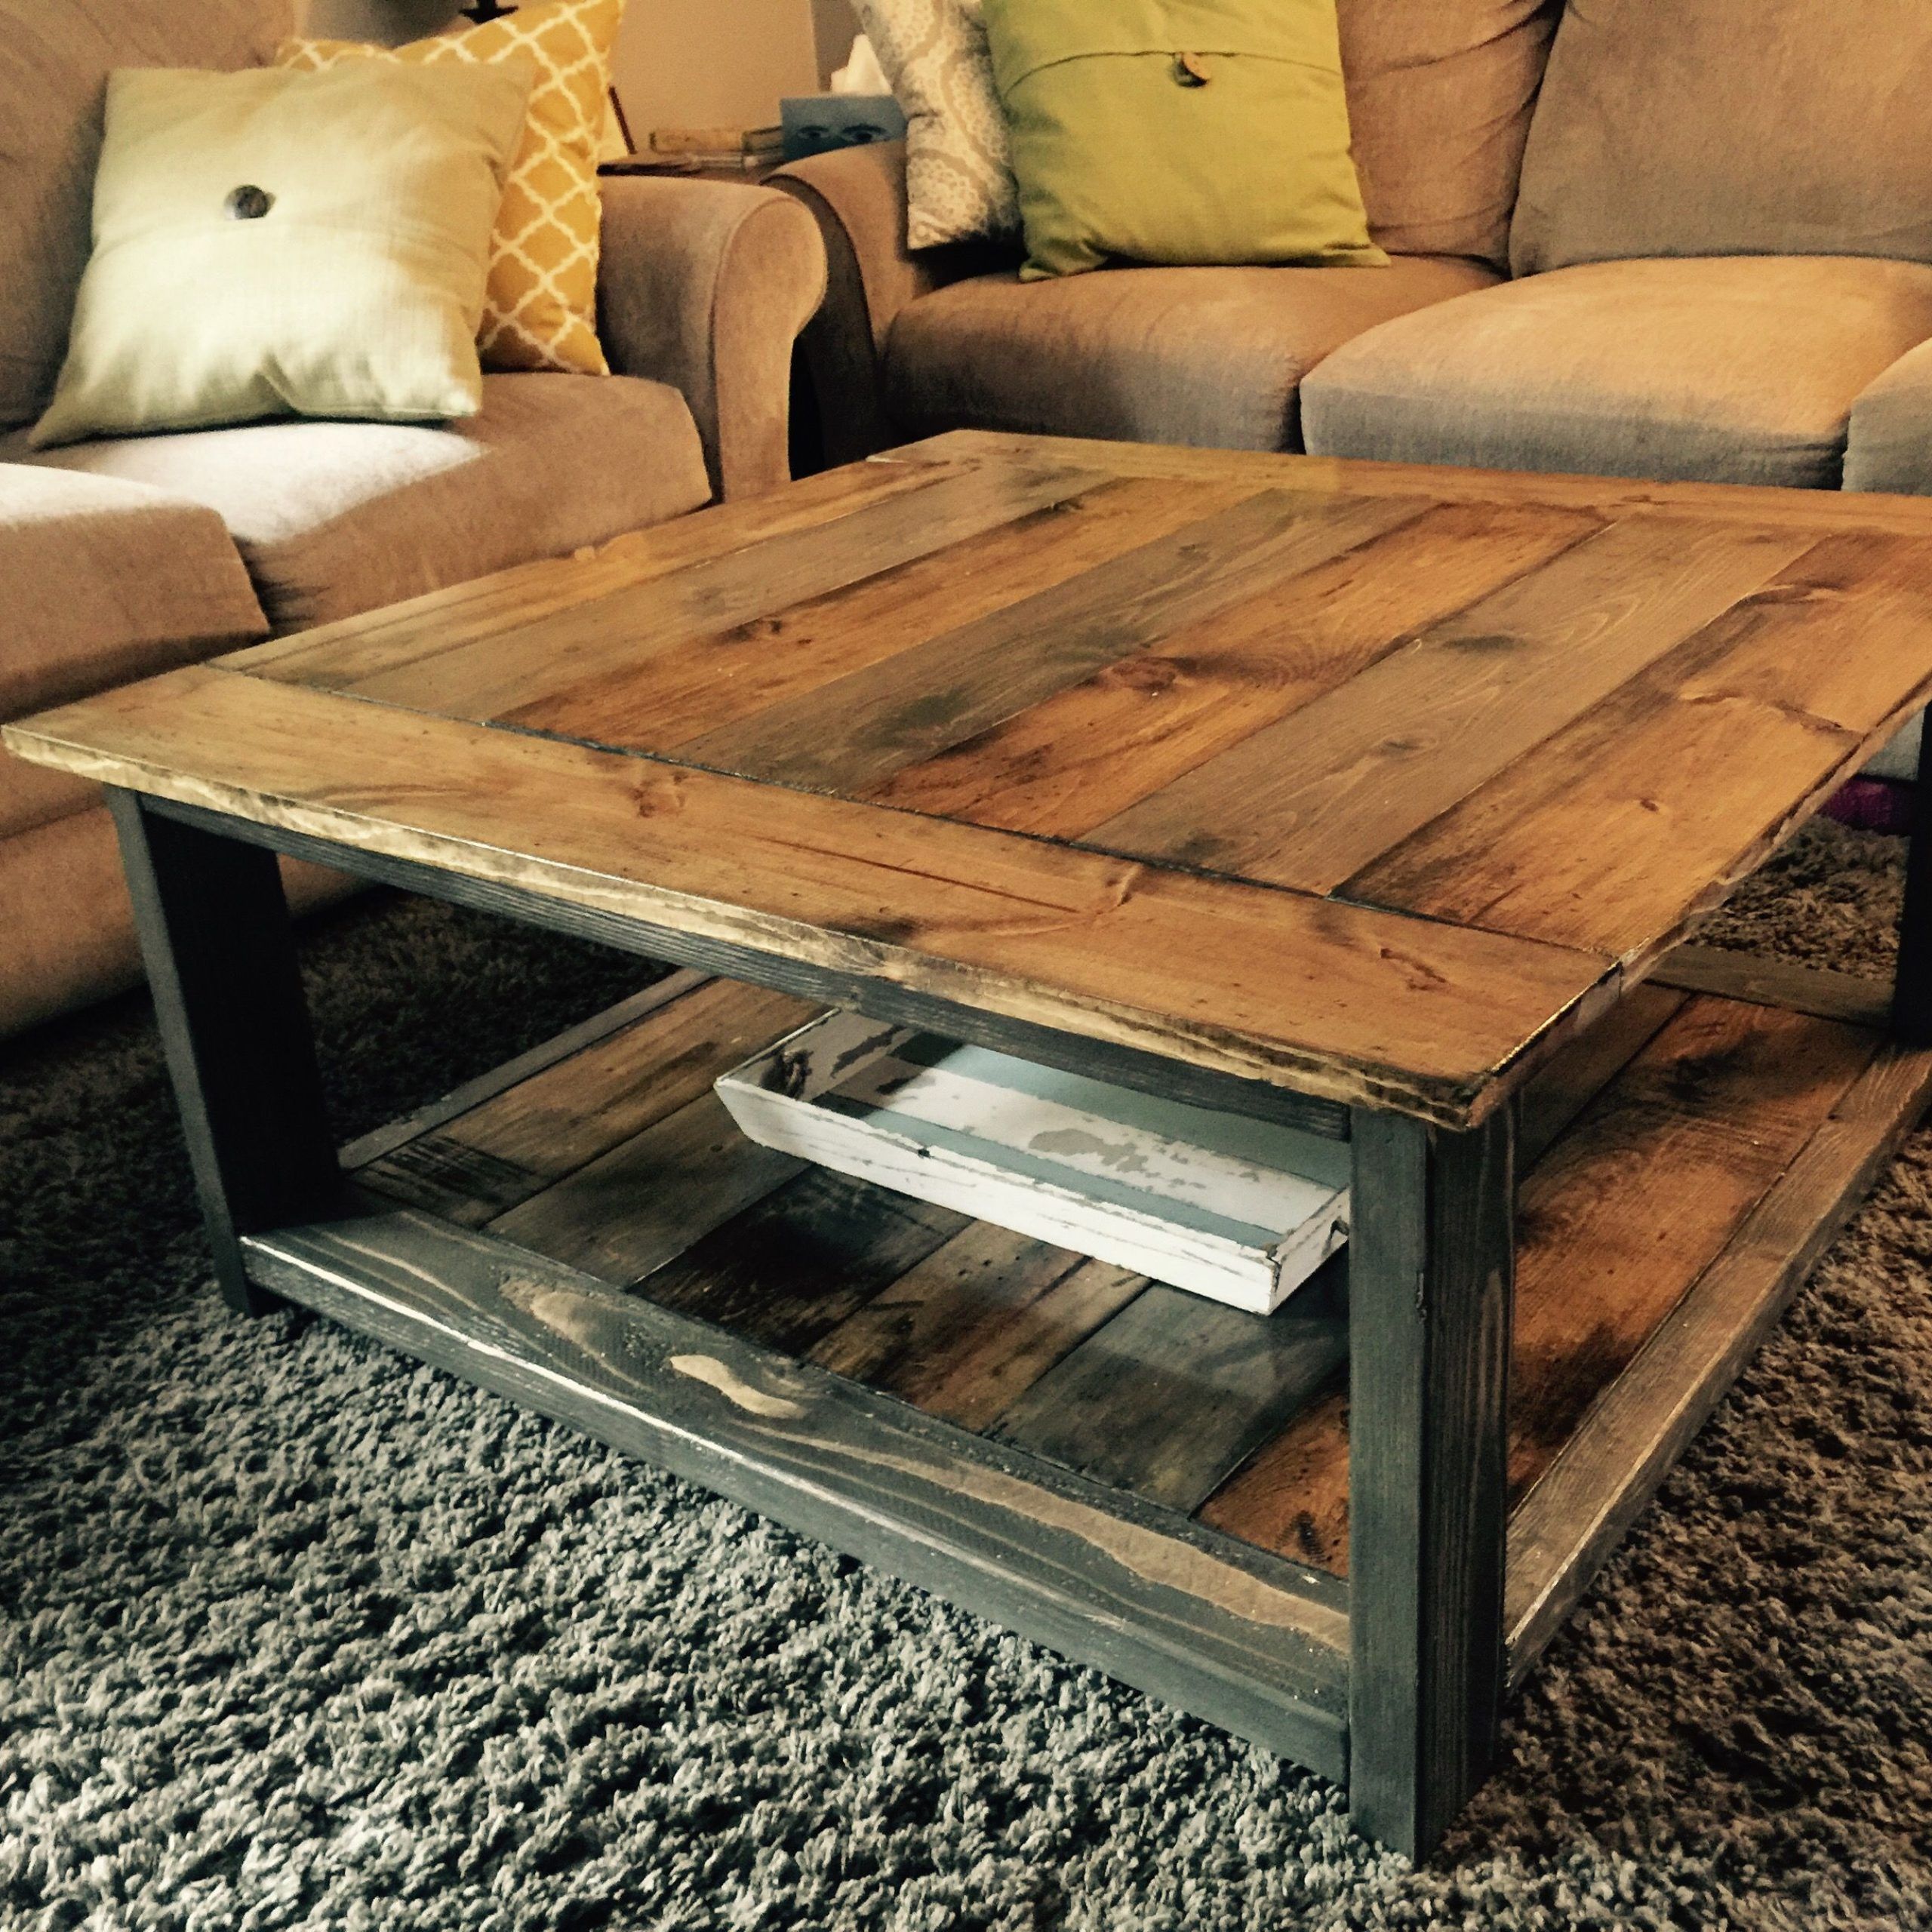 Rustic Xless Coffee Table | Do It Yourself Home Projects From Ana White Within Rustic Wood Coffee Tables (Photo 9 of 15)